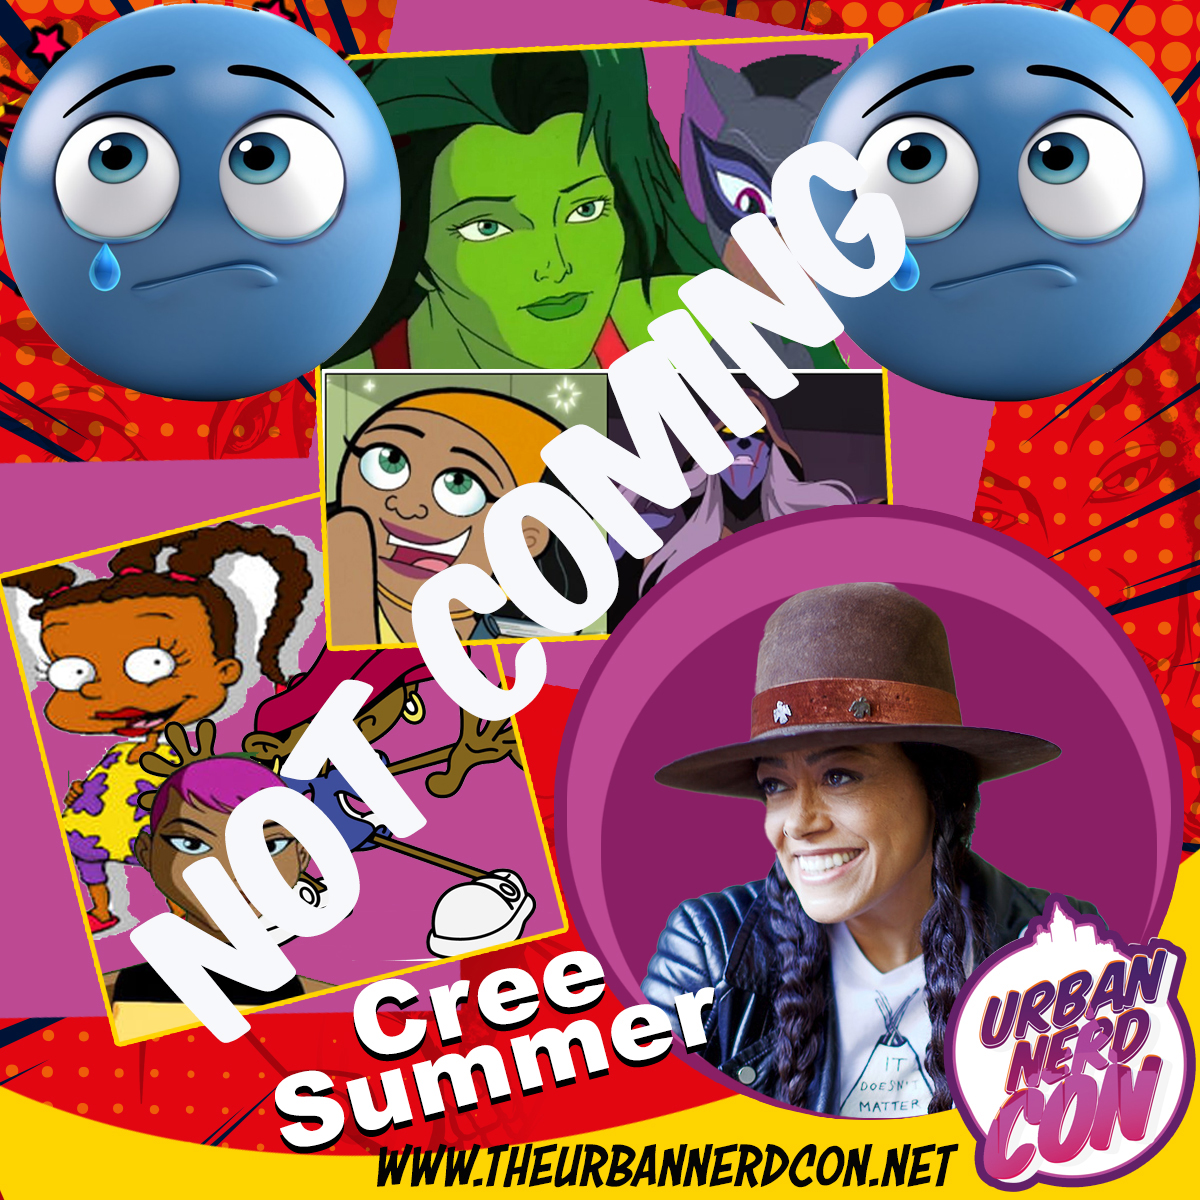 GUEST ANNOUNCEMENT!!! Well this is another sad one but this is what happens in the entertainment business. @IAmCreeSummer will not be able to attend THIS YEAR! We are looking forward to you coming next year! Your invite is always open!